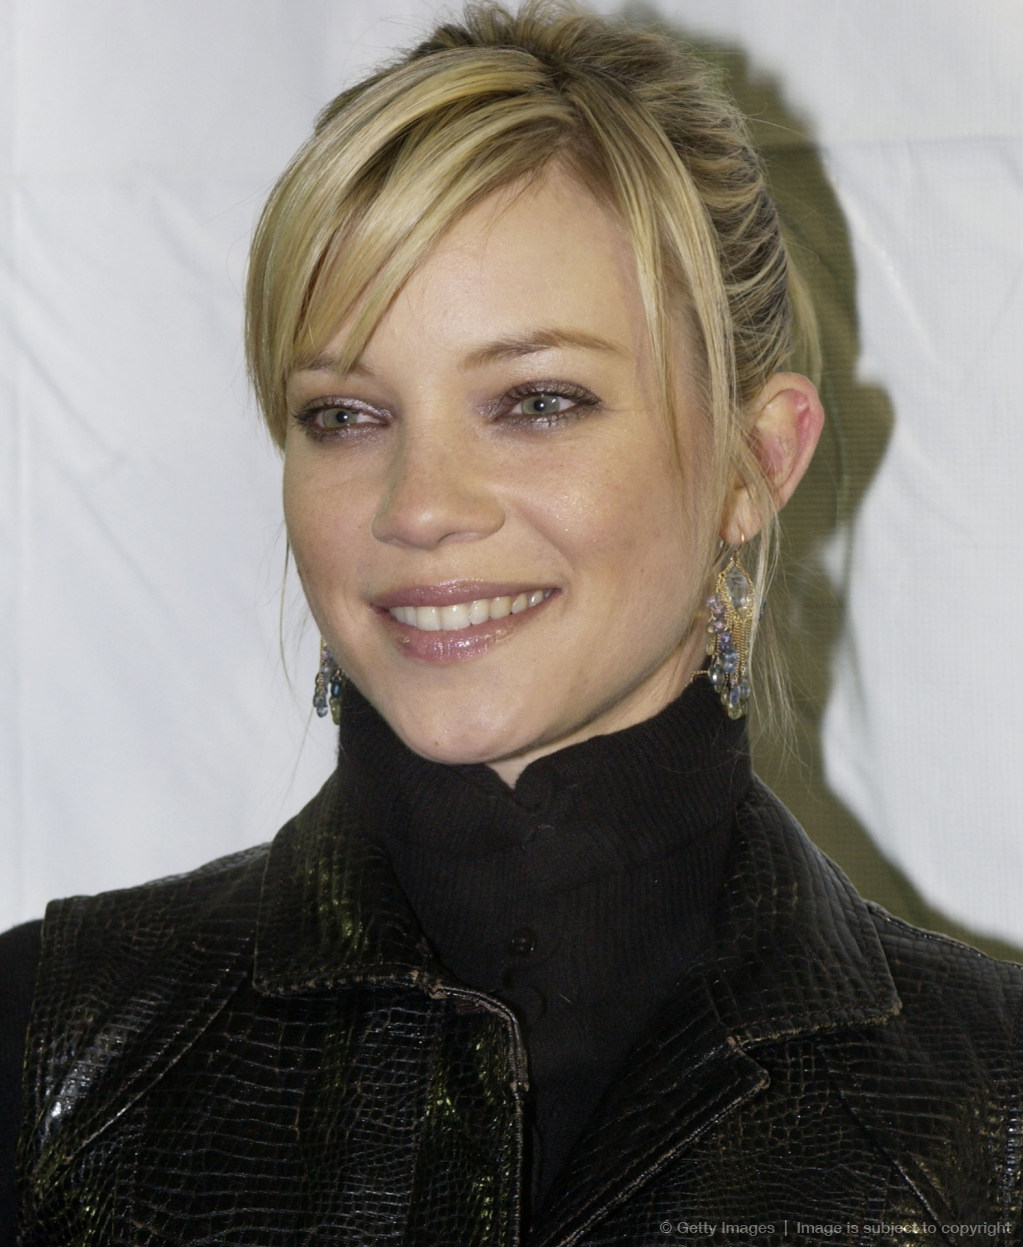 How tall is Amy Smart?